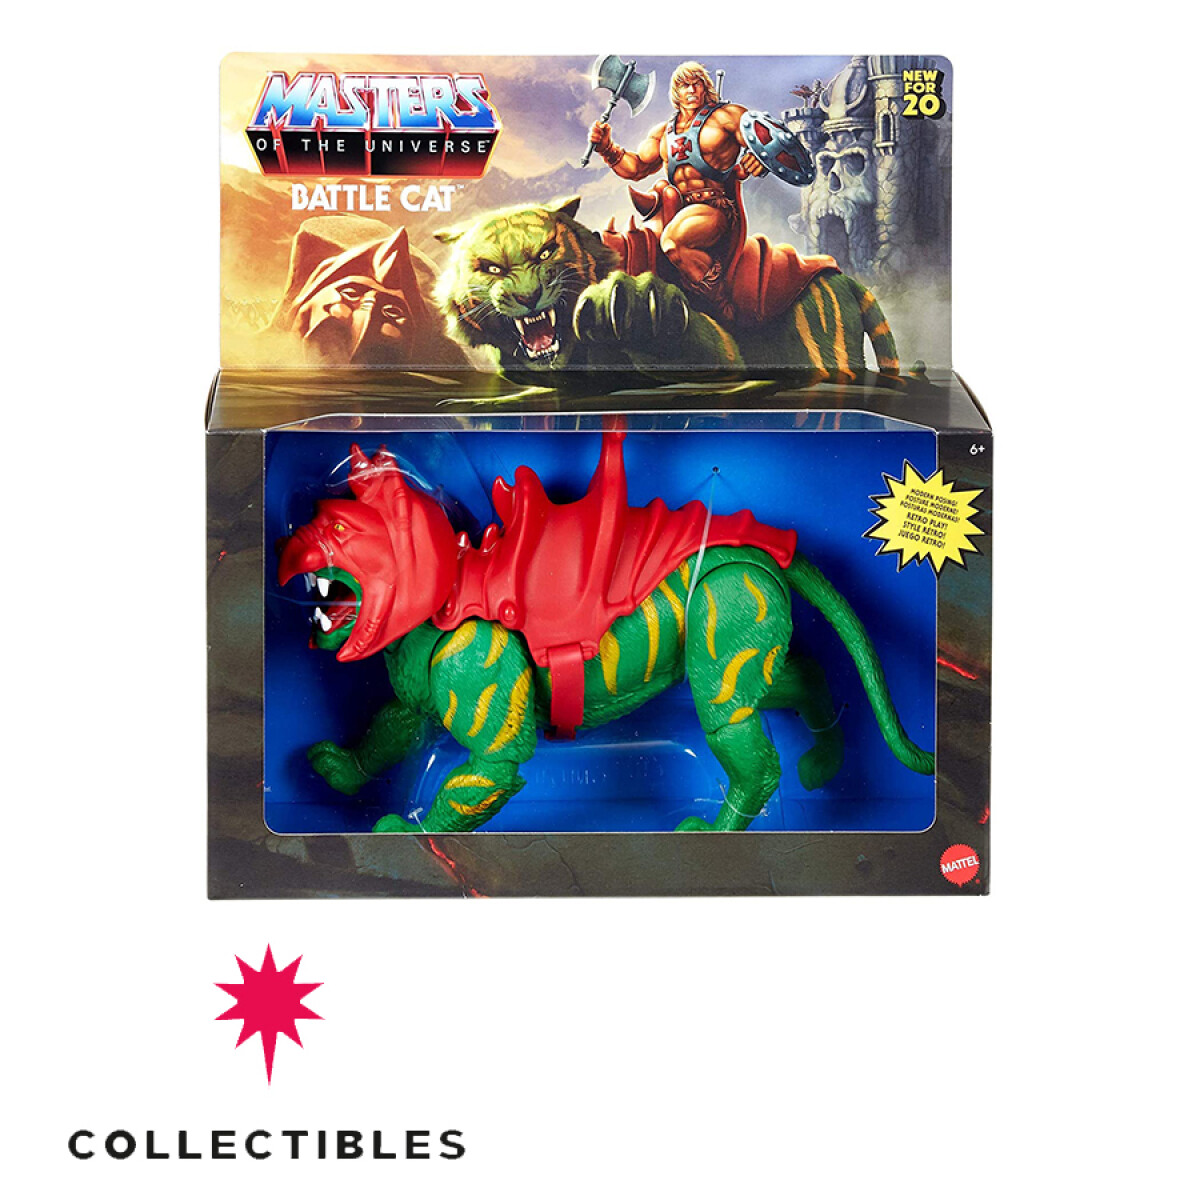 MASTERS OF THE UNIVERSE! ORIGINS BEASTS BATTLE CAT 